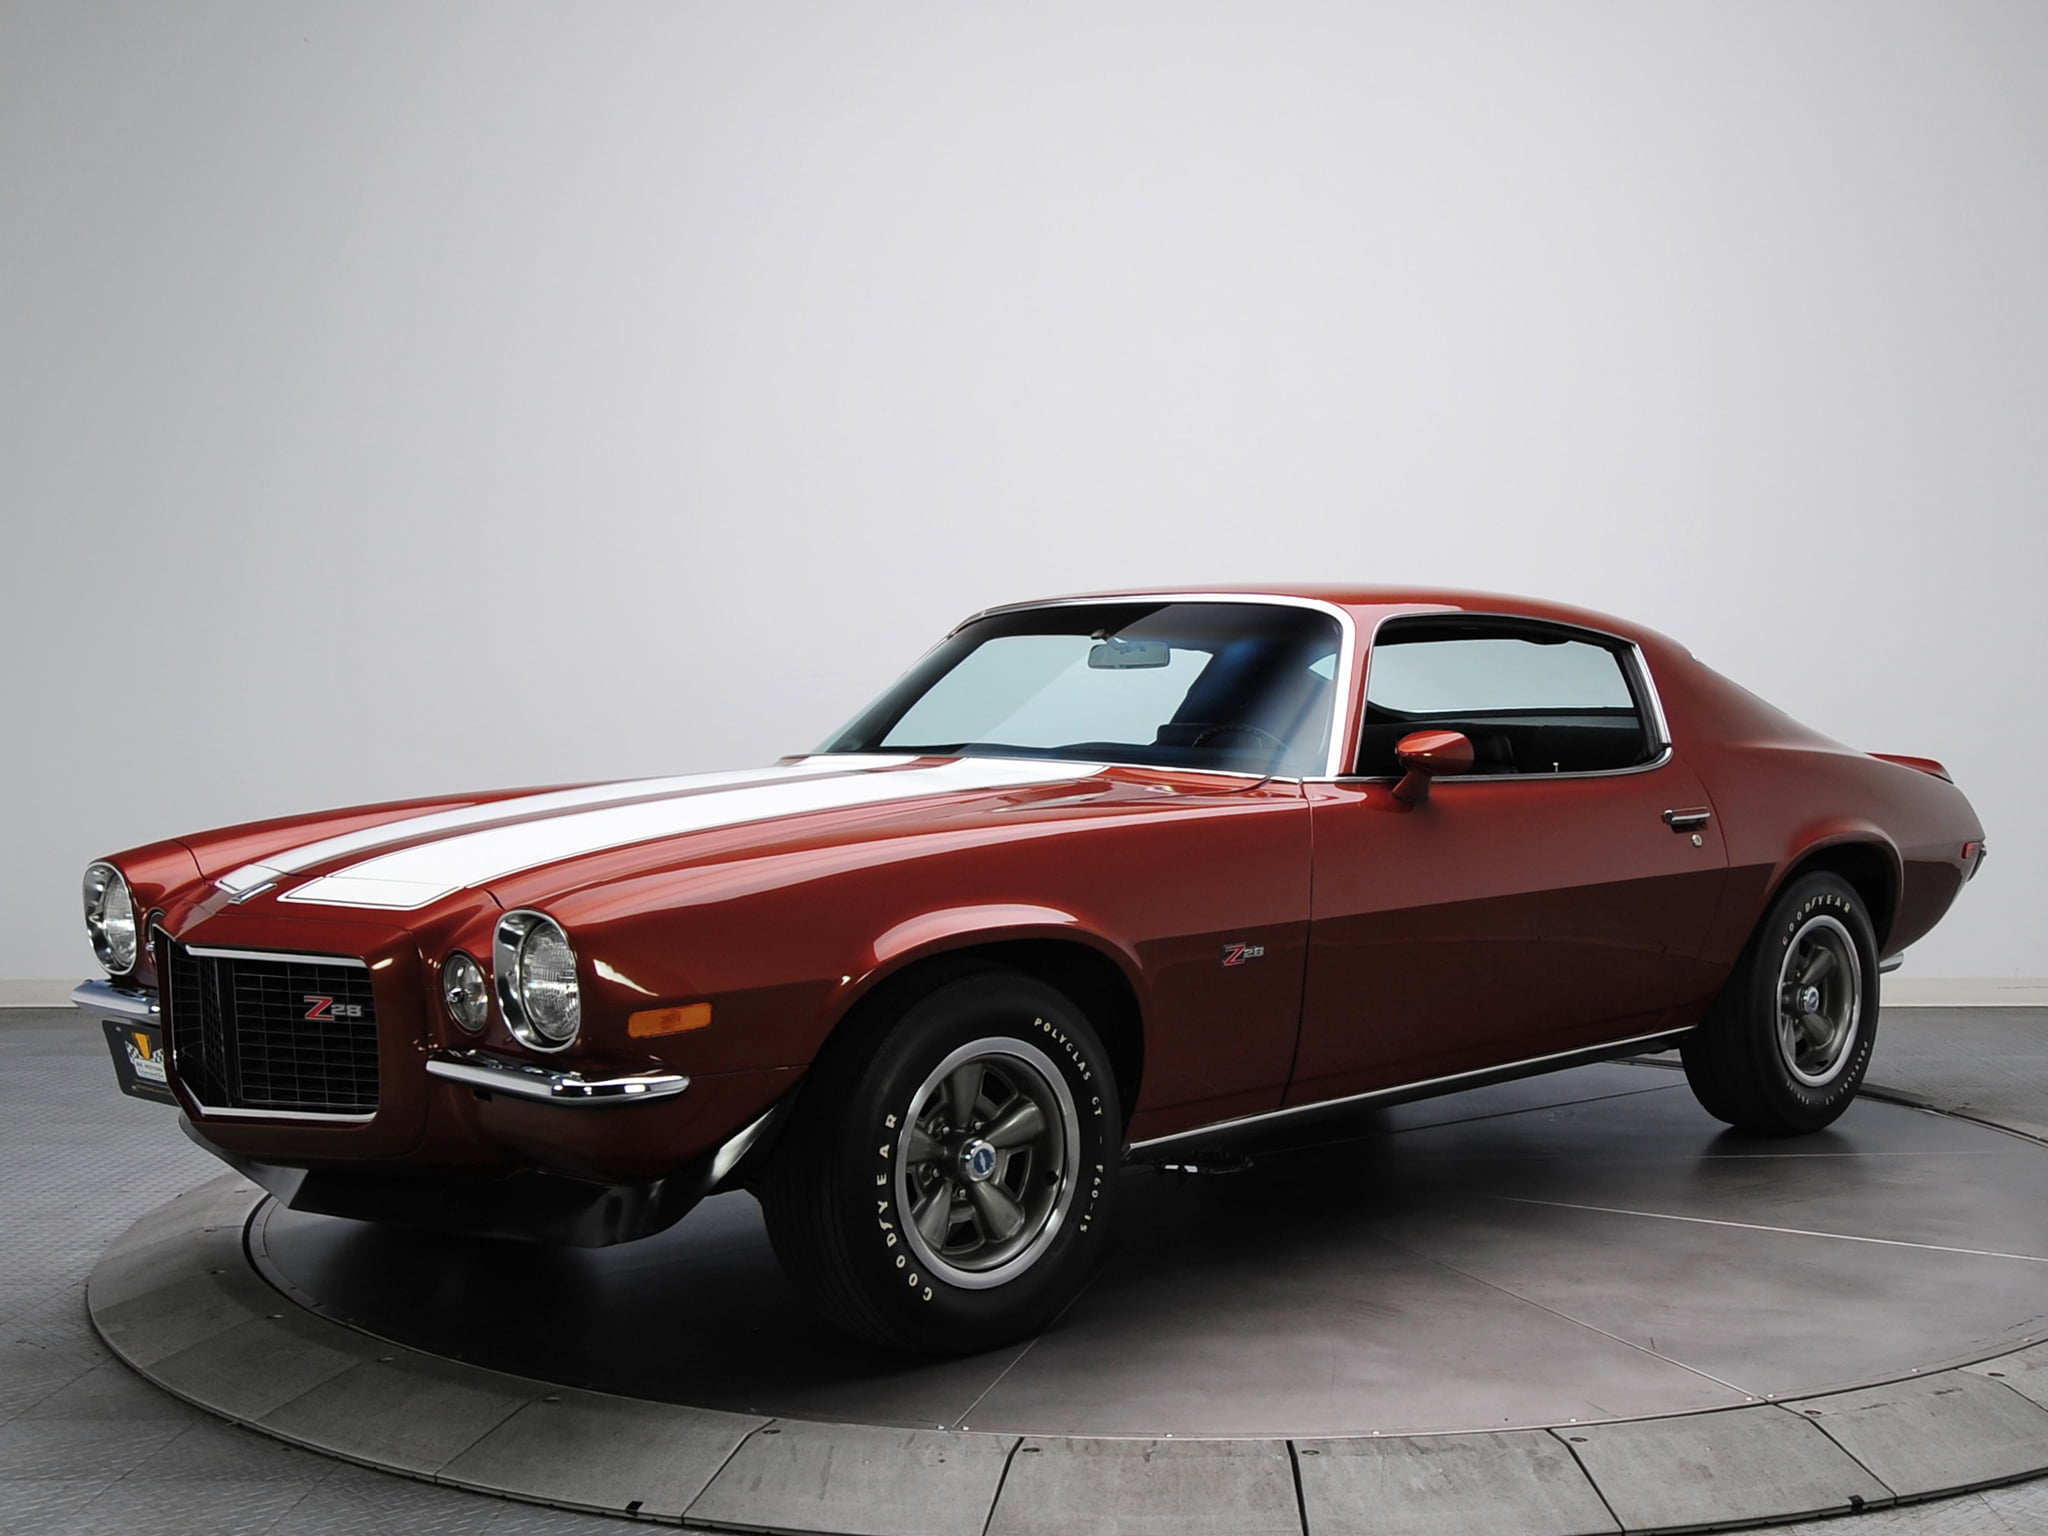 red coupe, retro, Chevrolet, muscle car, 1970, Camaro, z28, land Vehicle